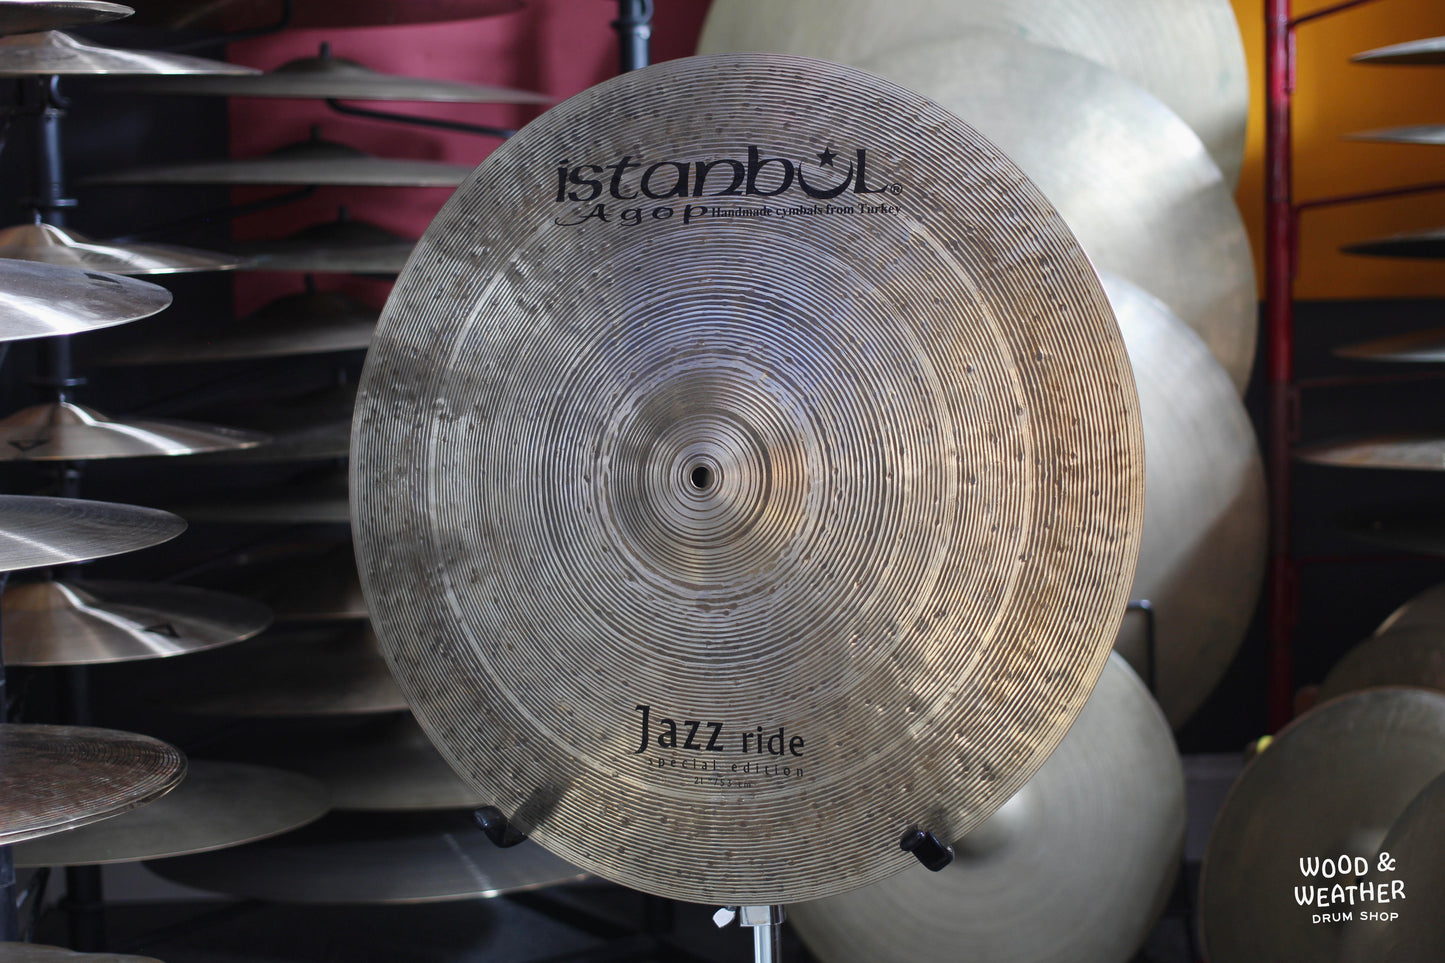 Used Istanbul Agop 21" Special Edition Jazz Ride Cymbal 2062g